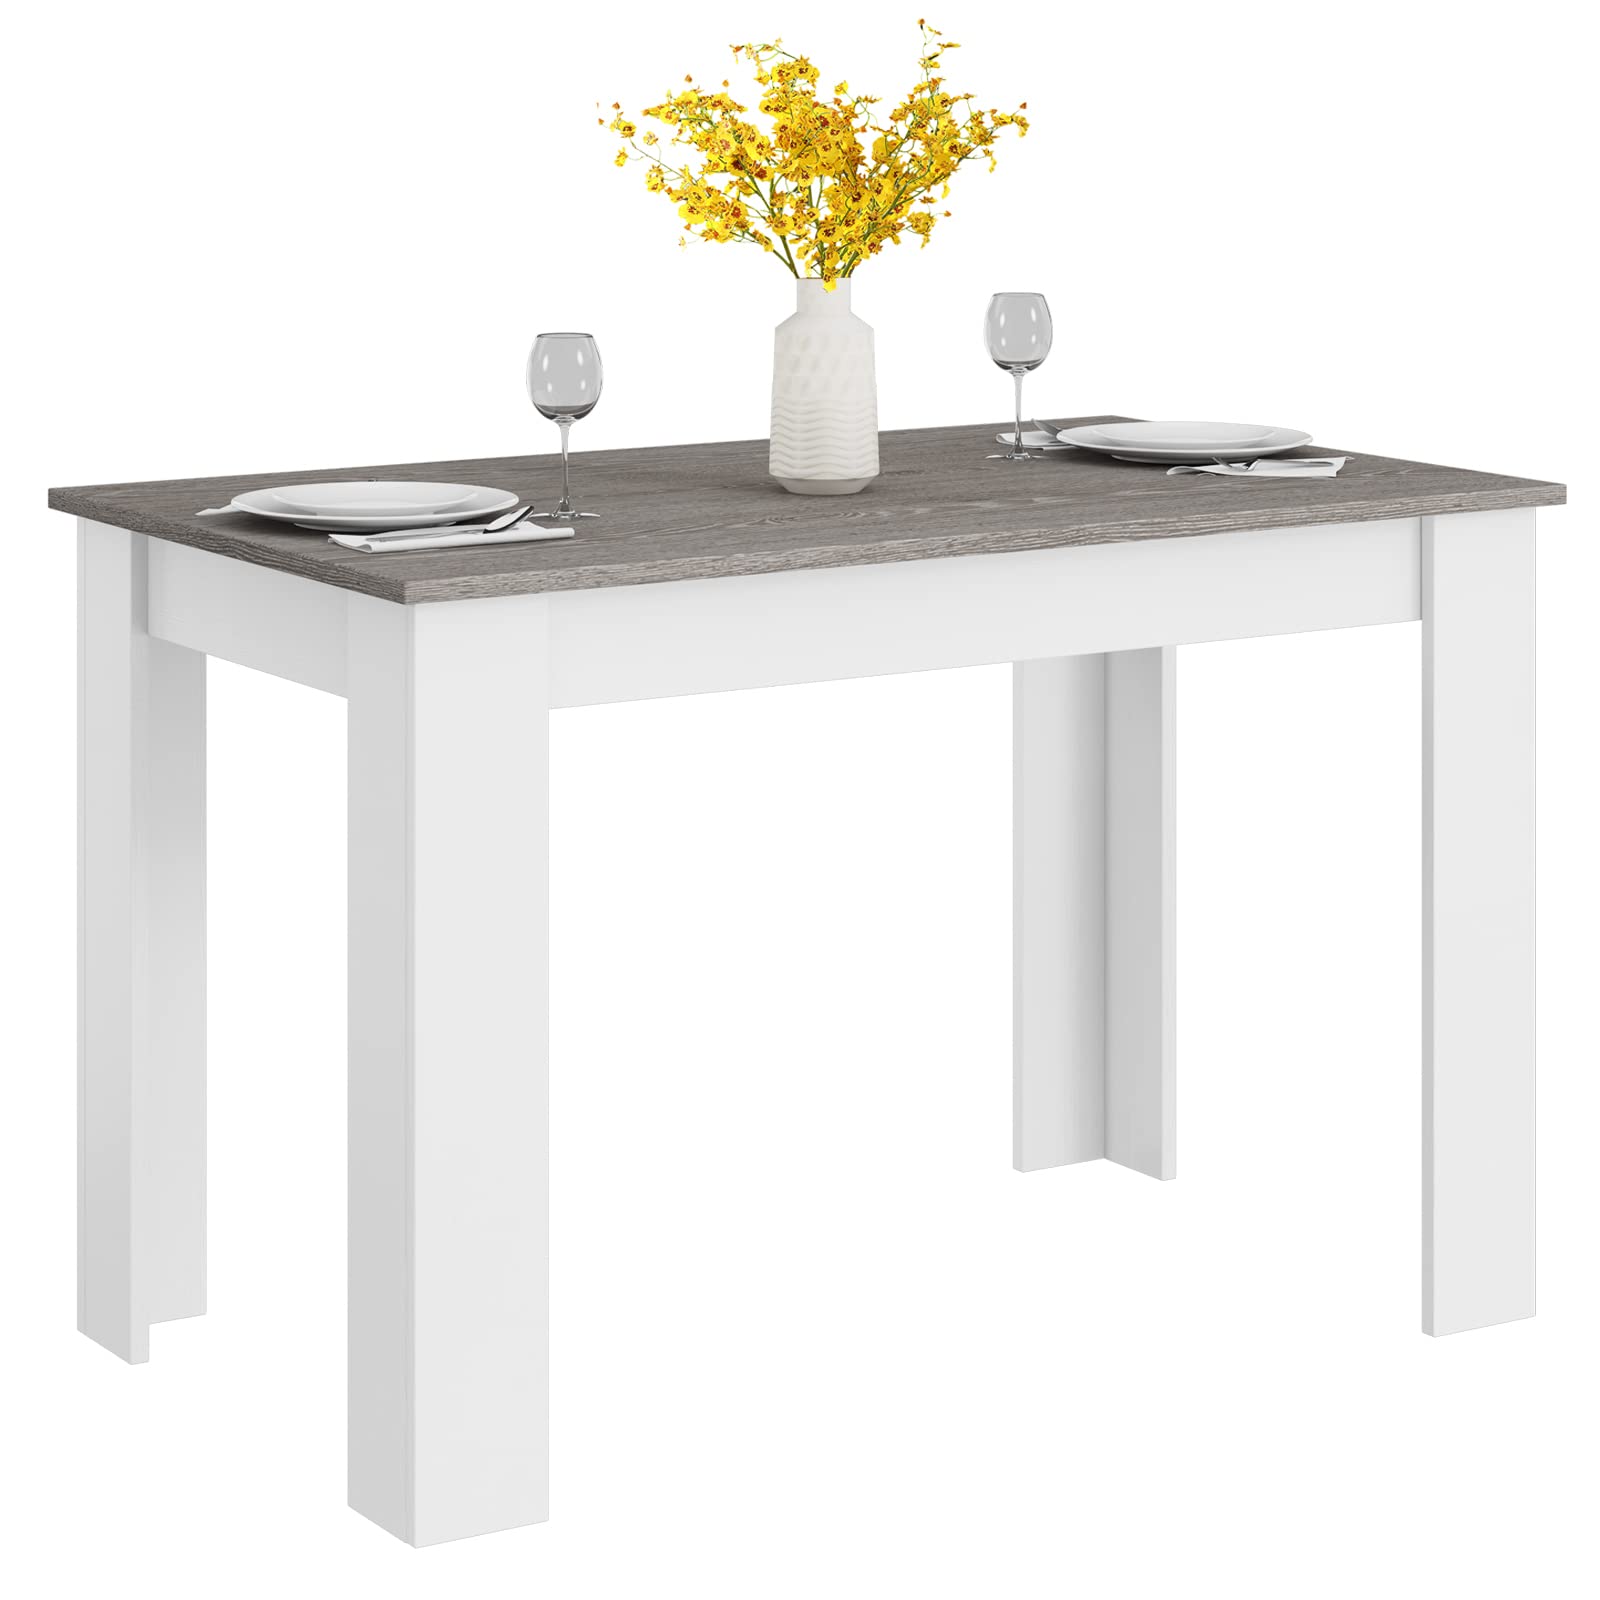 47 Inch Dining Table - Giantex